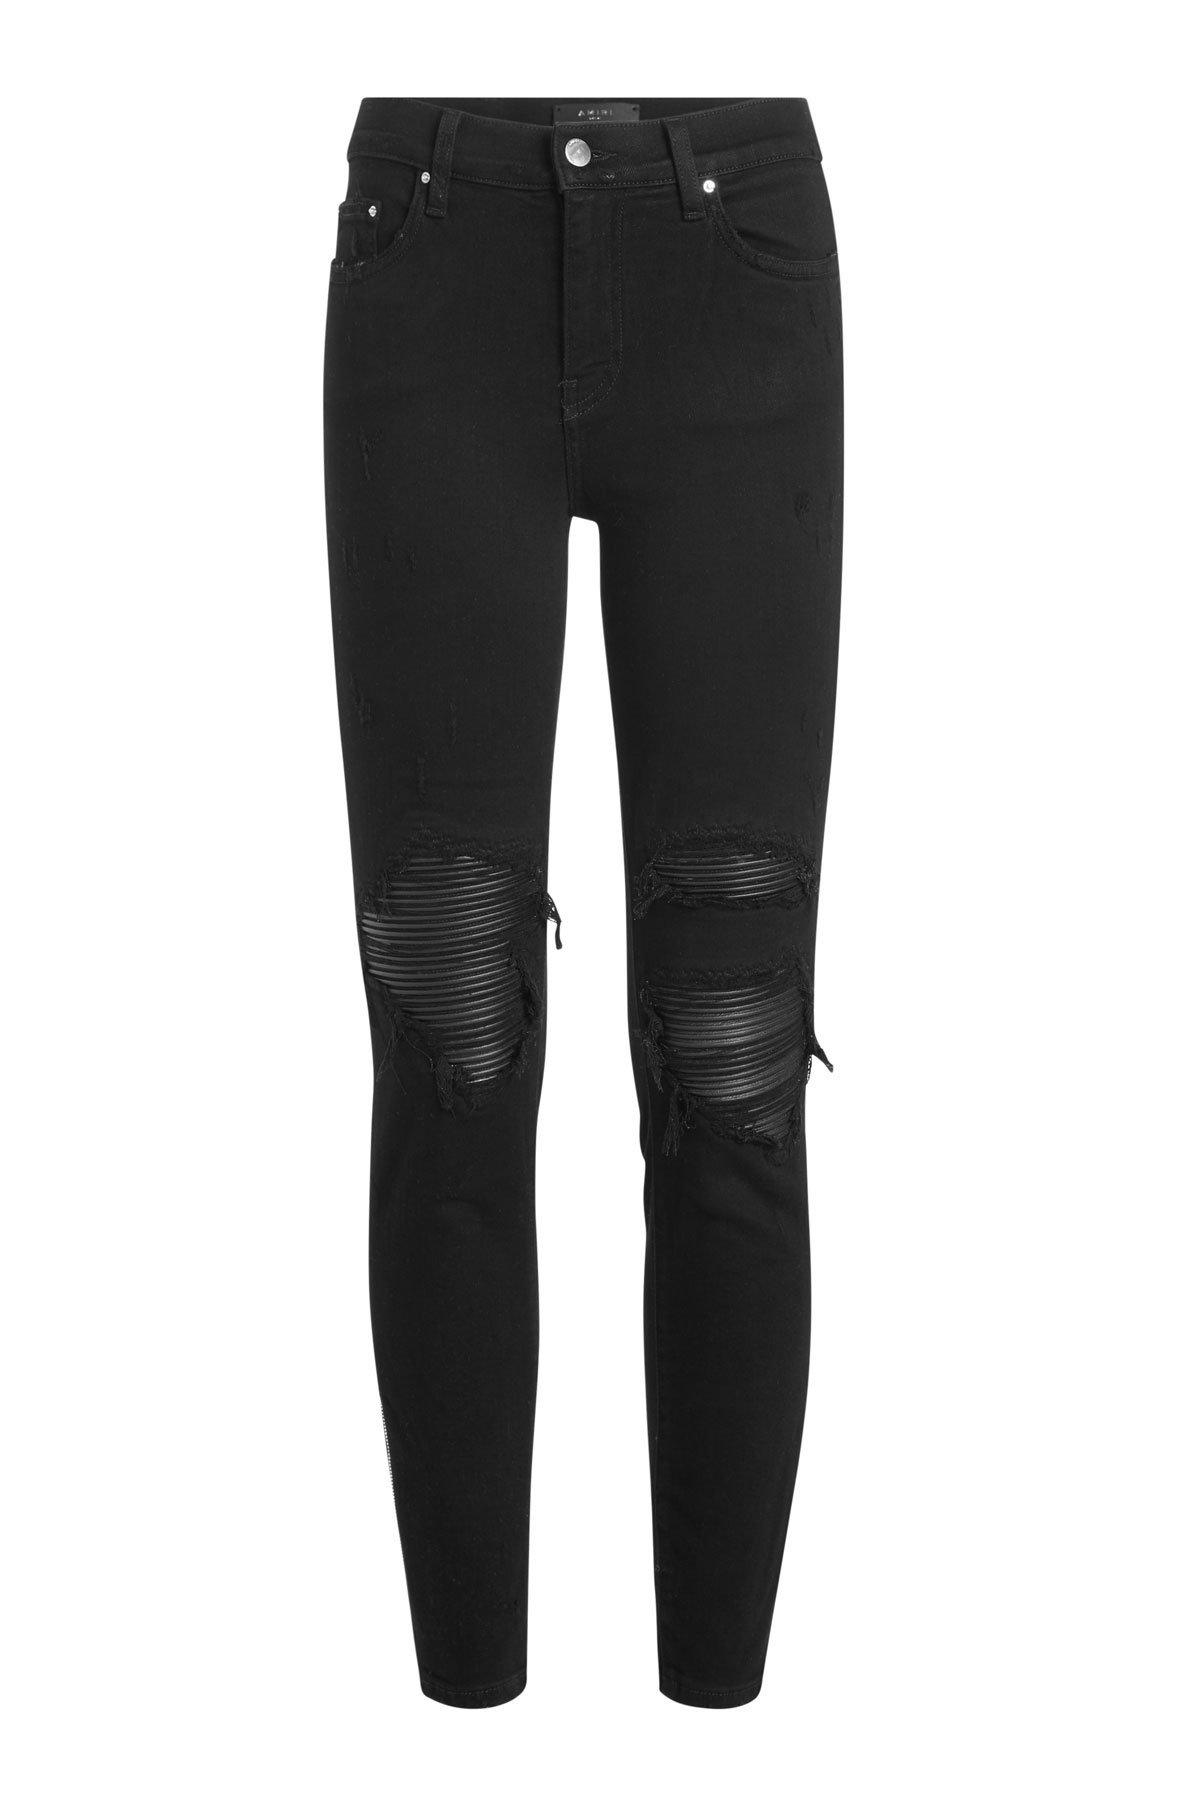 Amiri Skinny Jeans With Leather Patches In Black | ModeSens